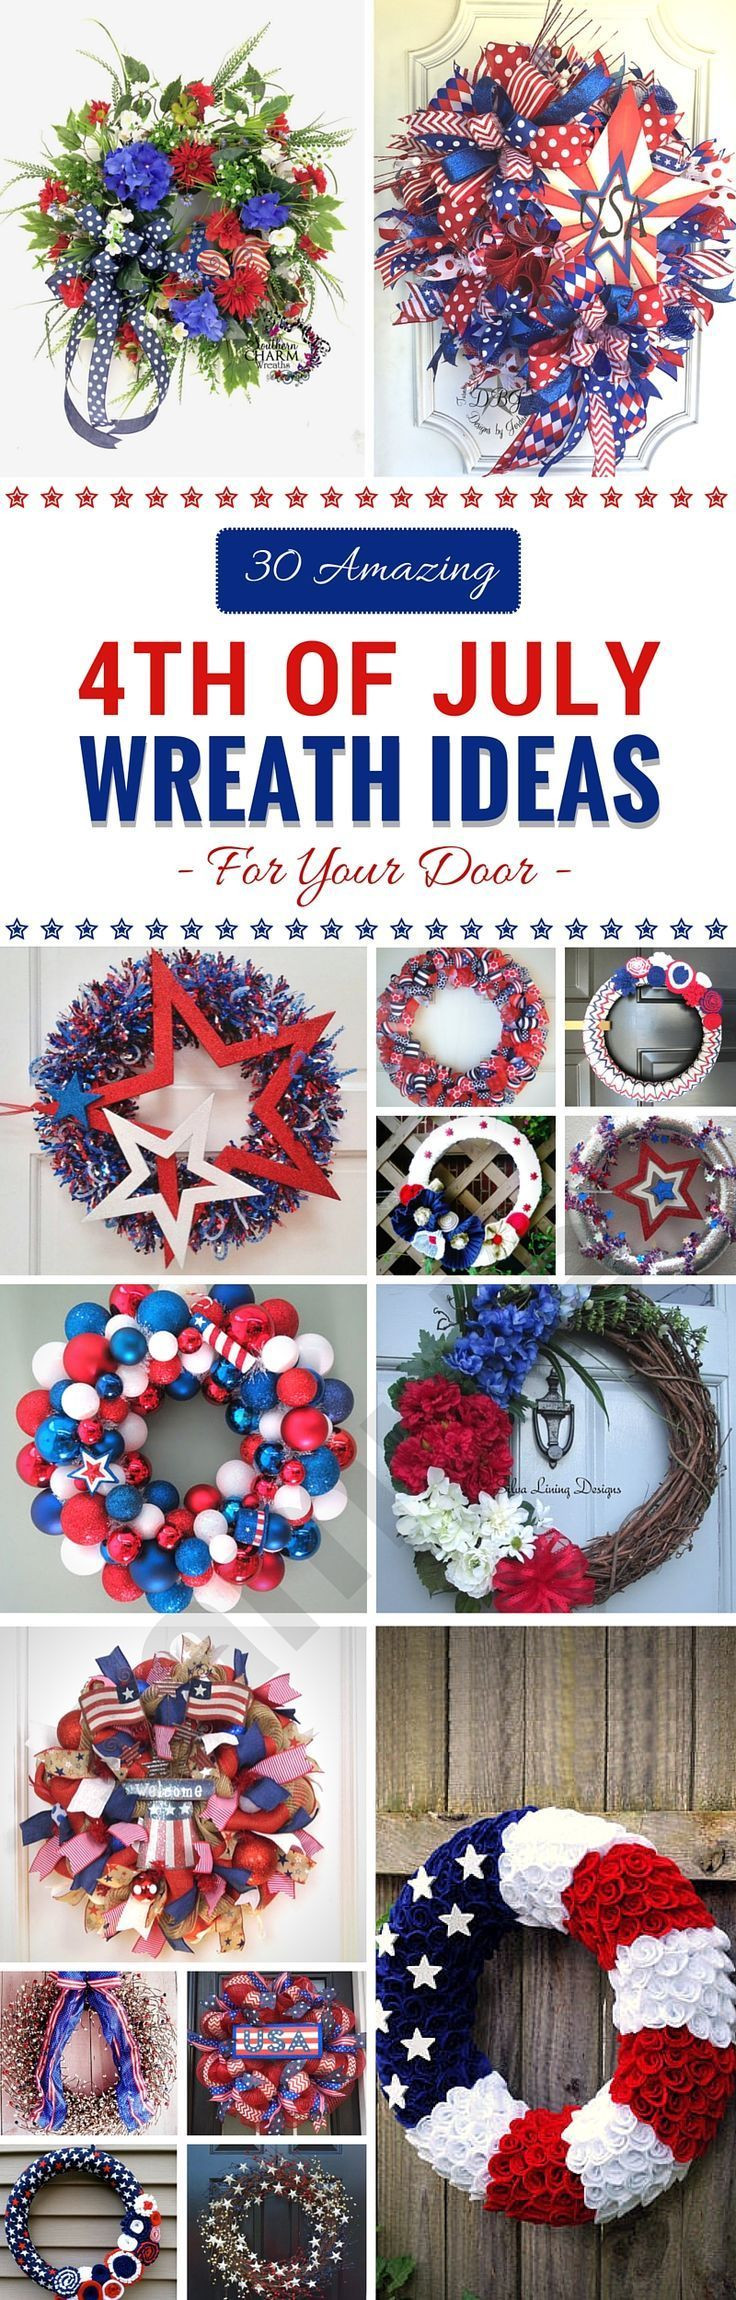 4th Of July Vacation Ideas
 30 Amazing 4th of July Wreath Ideas for Your Door